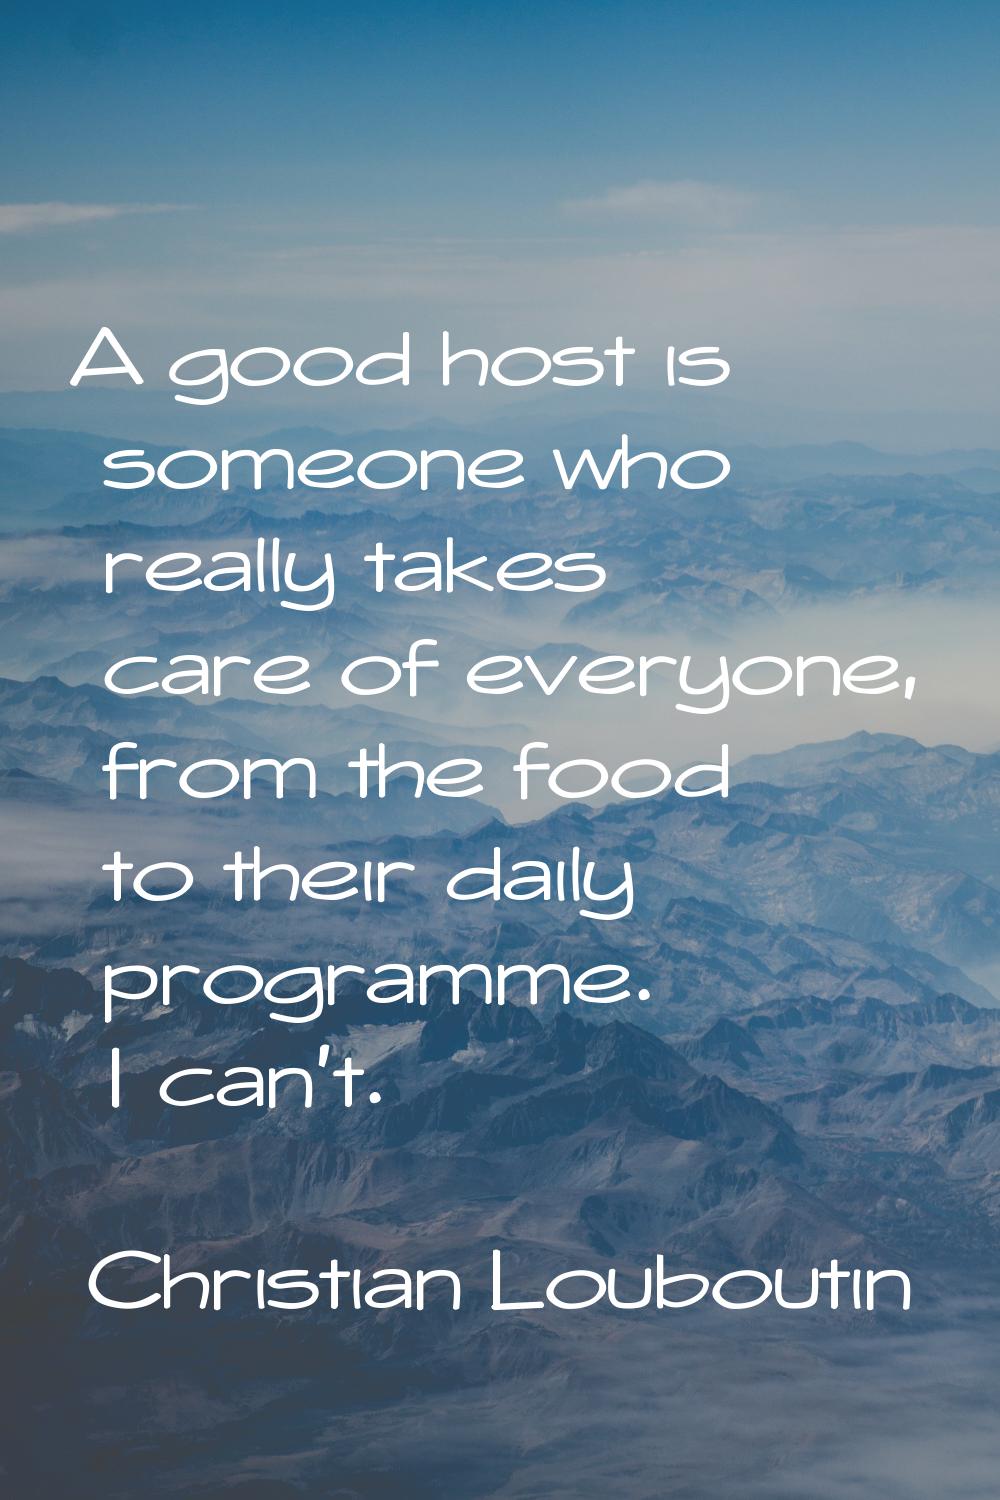 A good host is someone who really takes care of everyone, from the food to their daily programme. I